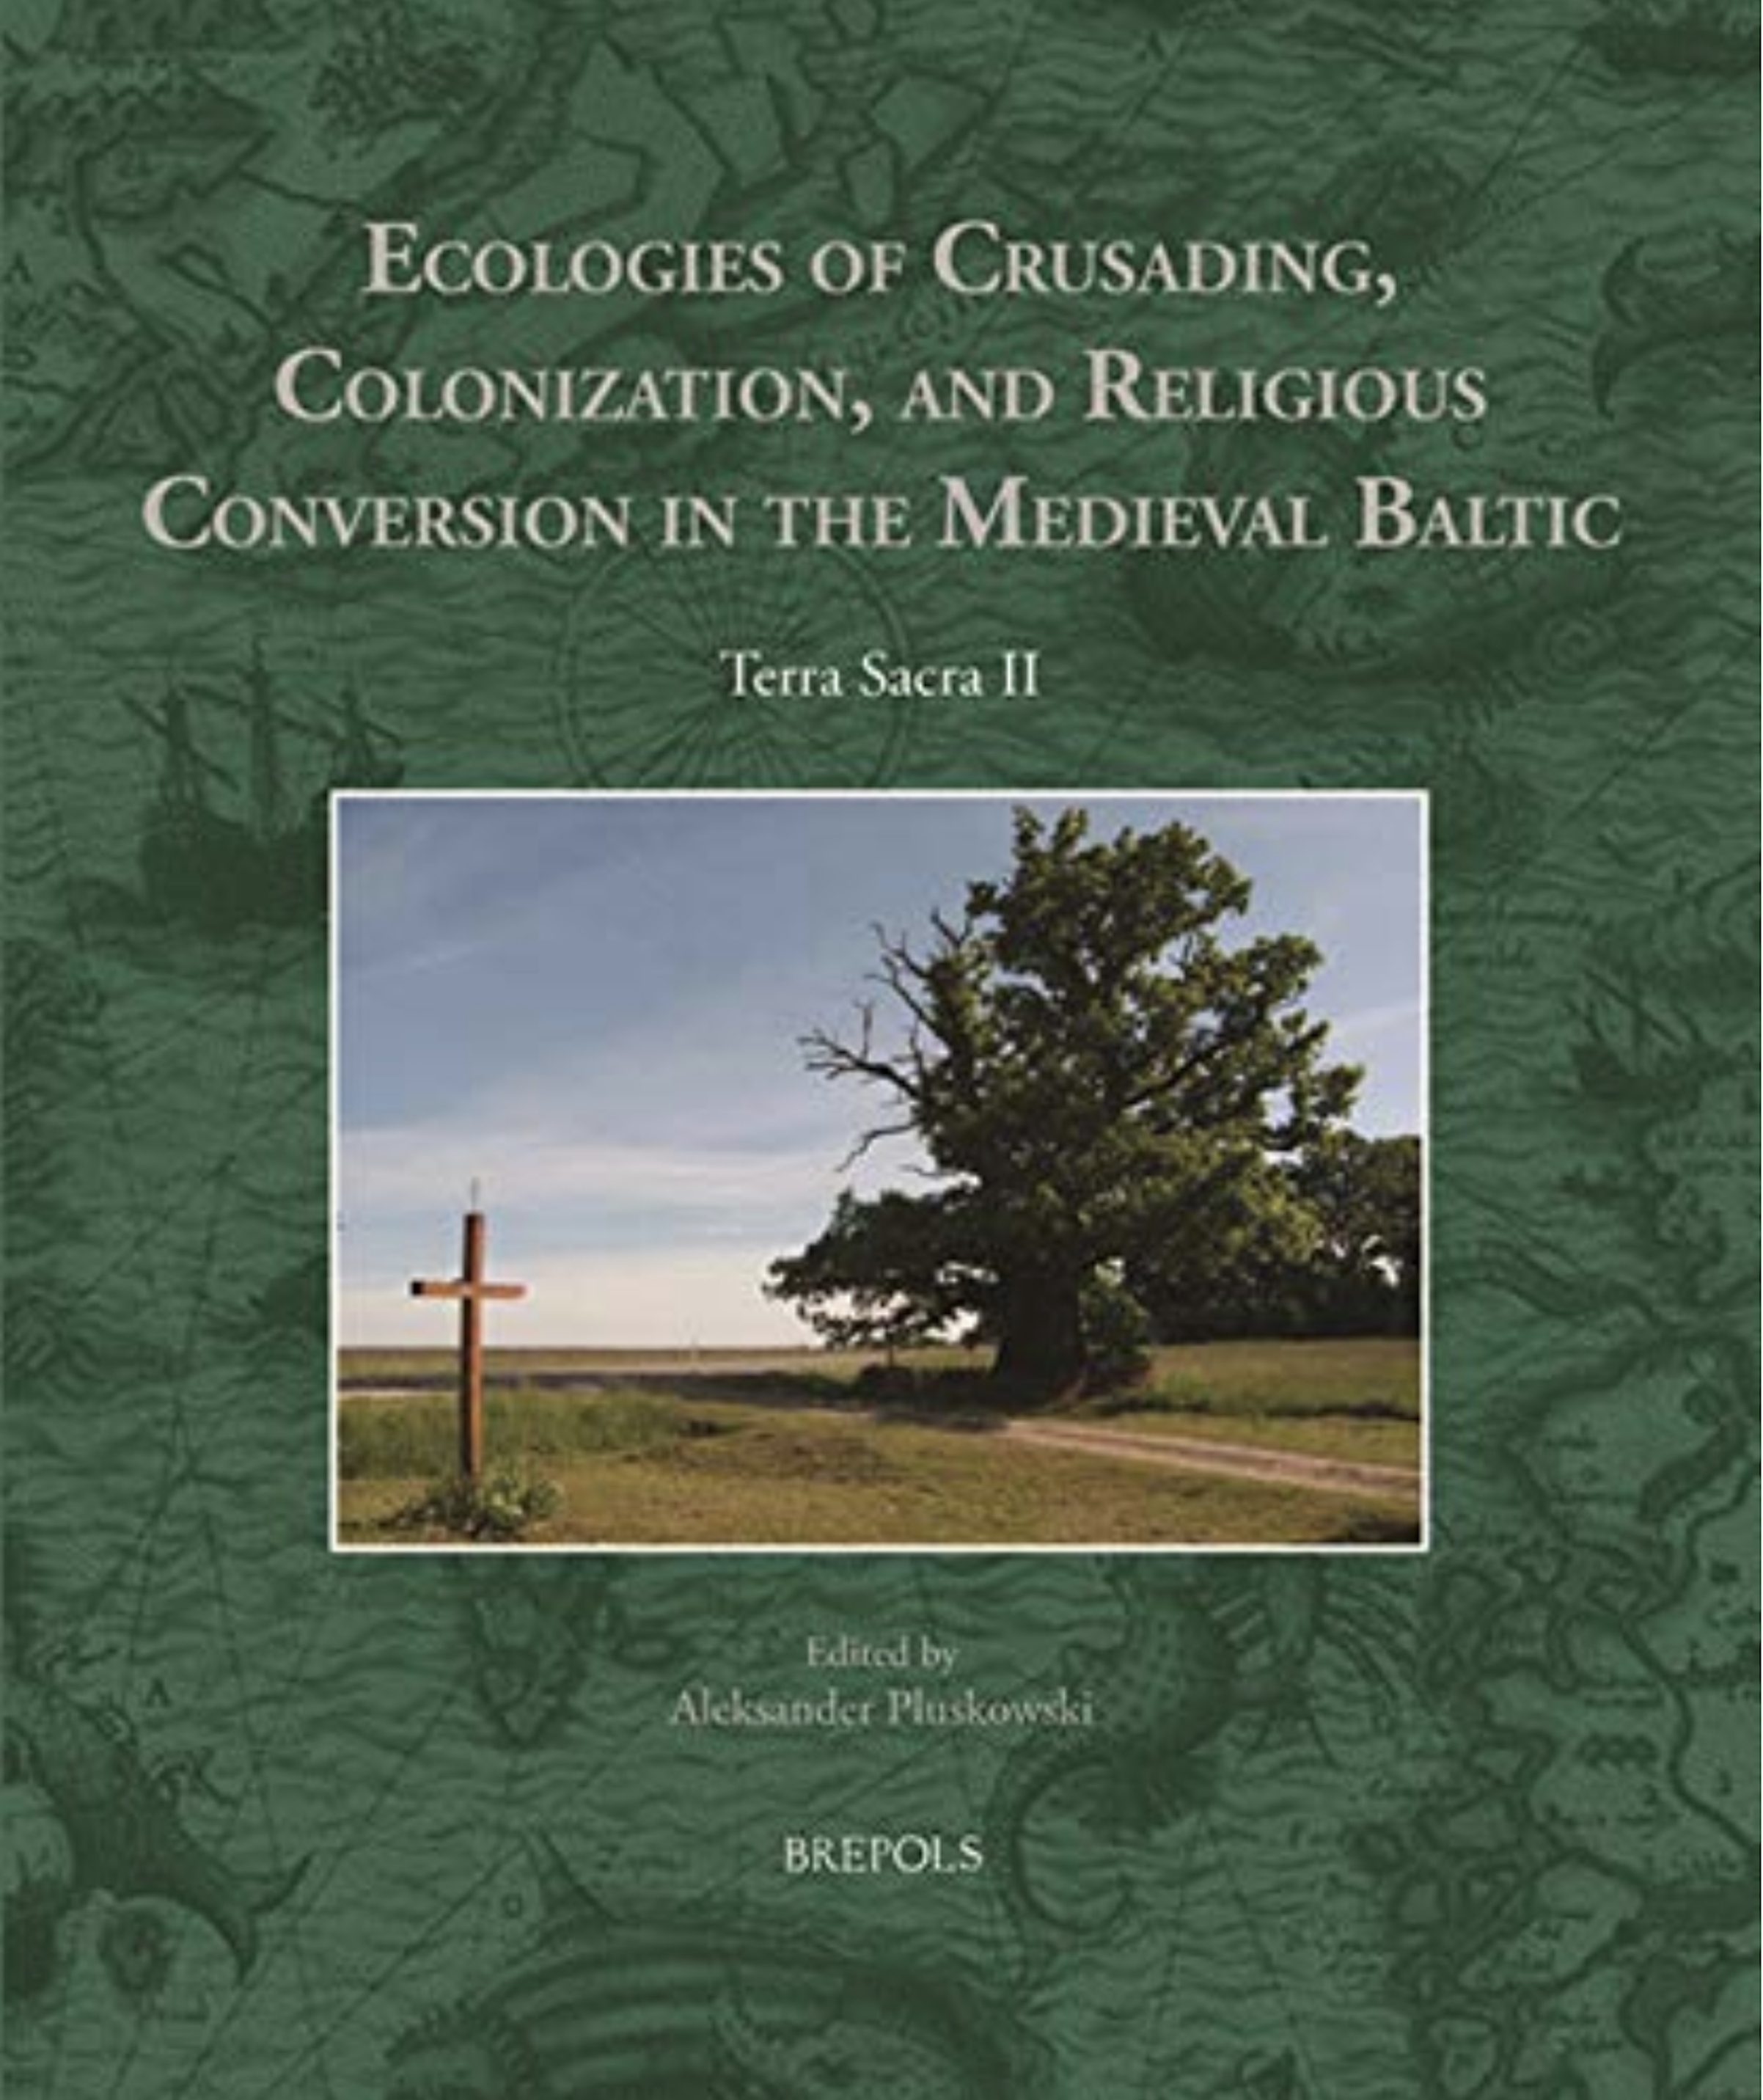 Review of Aleksander Pluskowski, ed., <i>Ecologies of Crusading, Colonization, and Religious Conversion in the Medieval Baltic: Terra Sacra II, Environmental Histories of the North Atlantic World</i> (Turnhout: Brepols, 2019), in <i>The Medieval Review</i> (2020). [W.L. Urban]